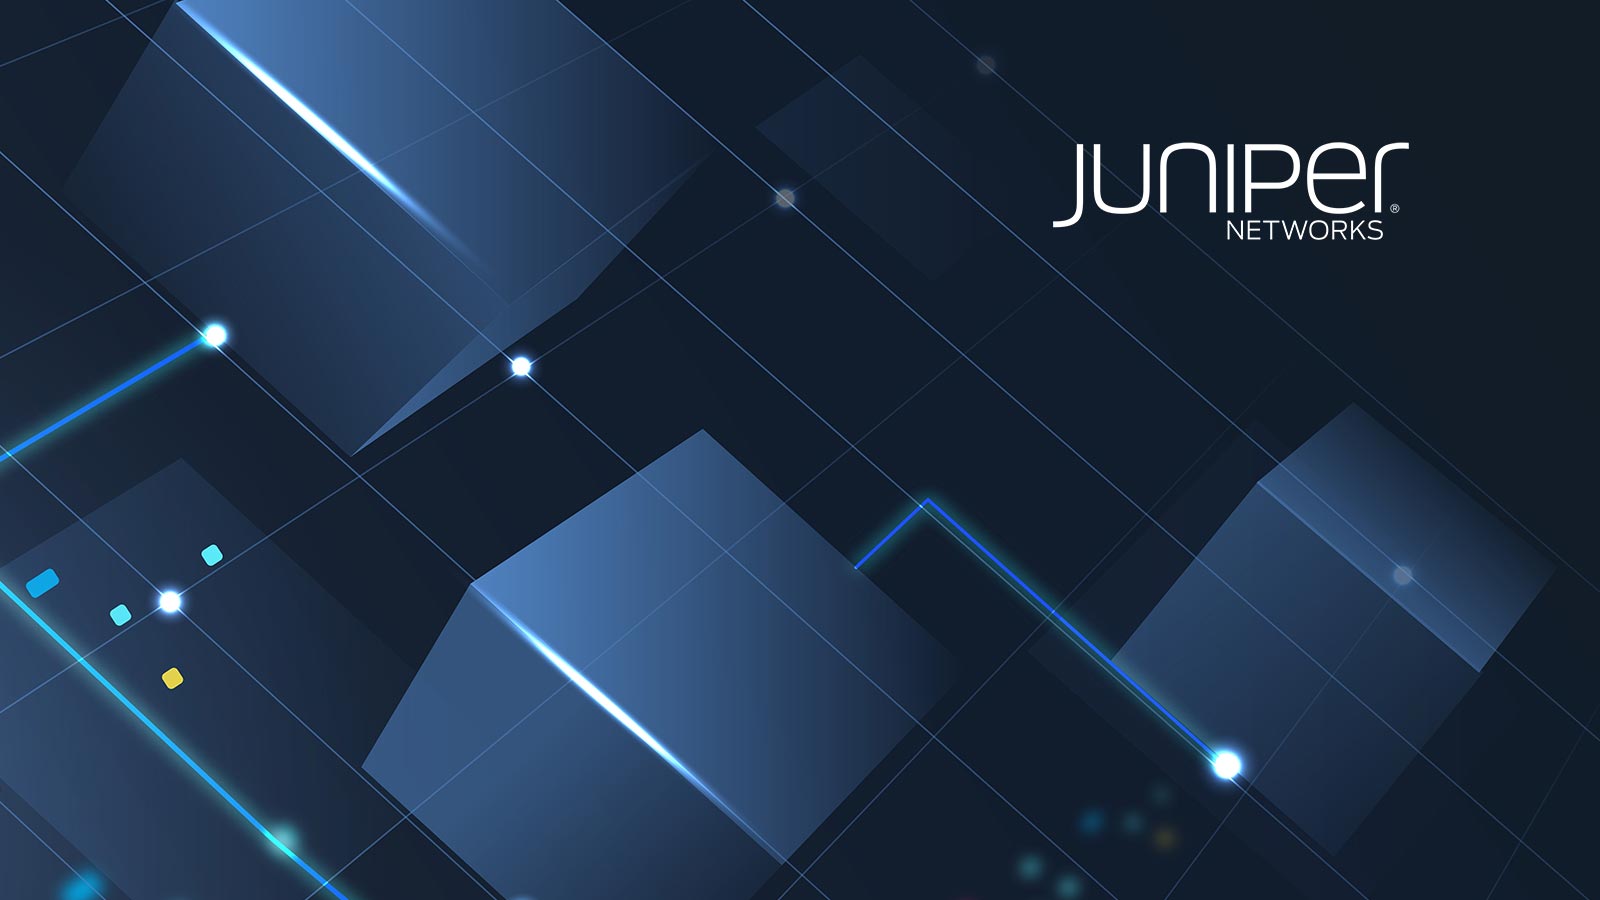 Juniper Networks takes intent networking to next level with new Apstra  software - TECHx Media